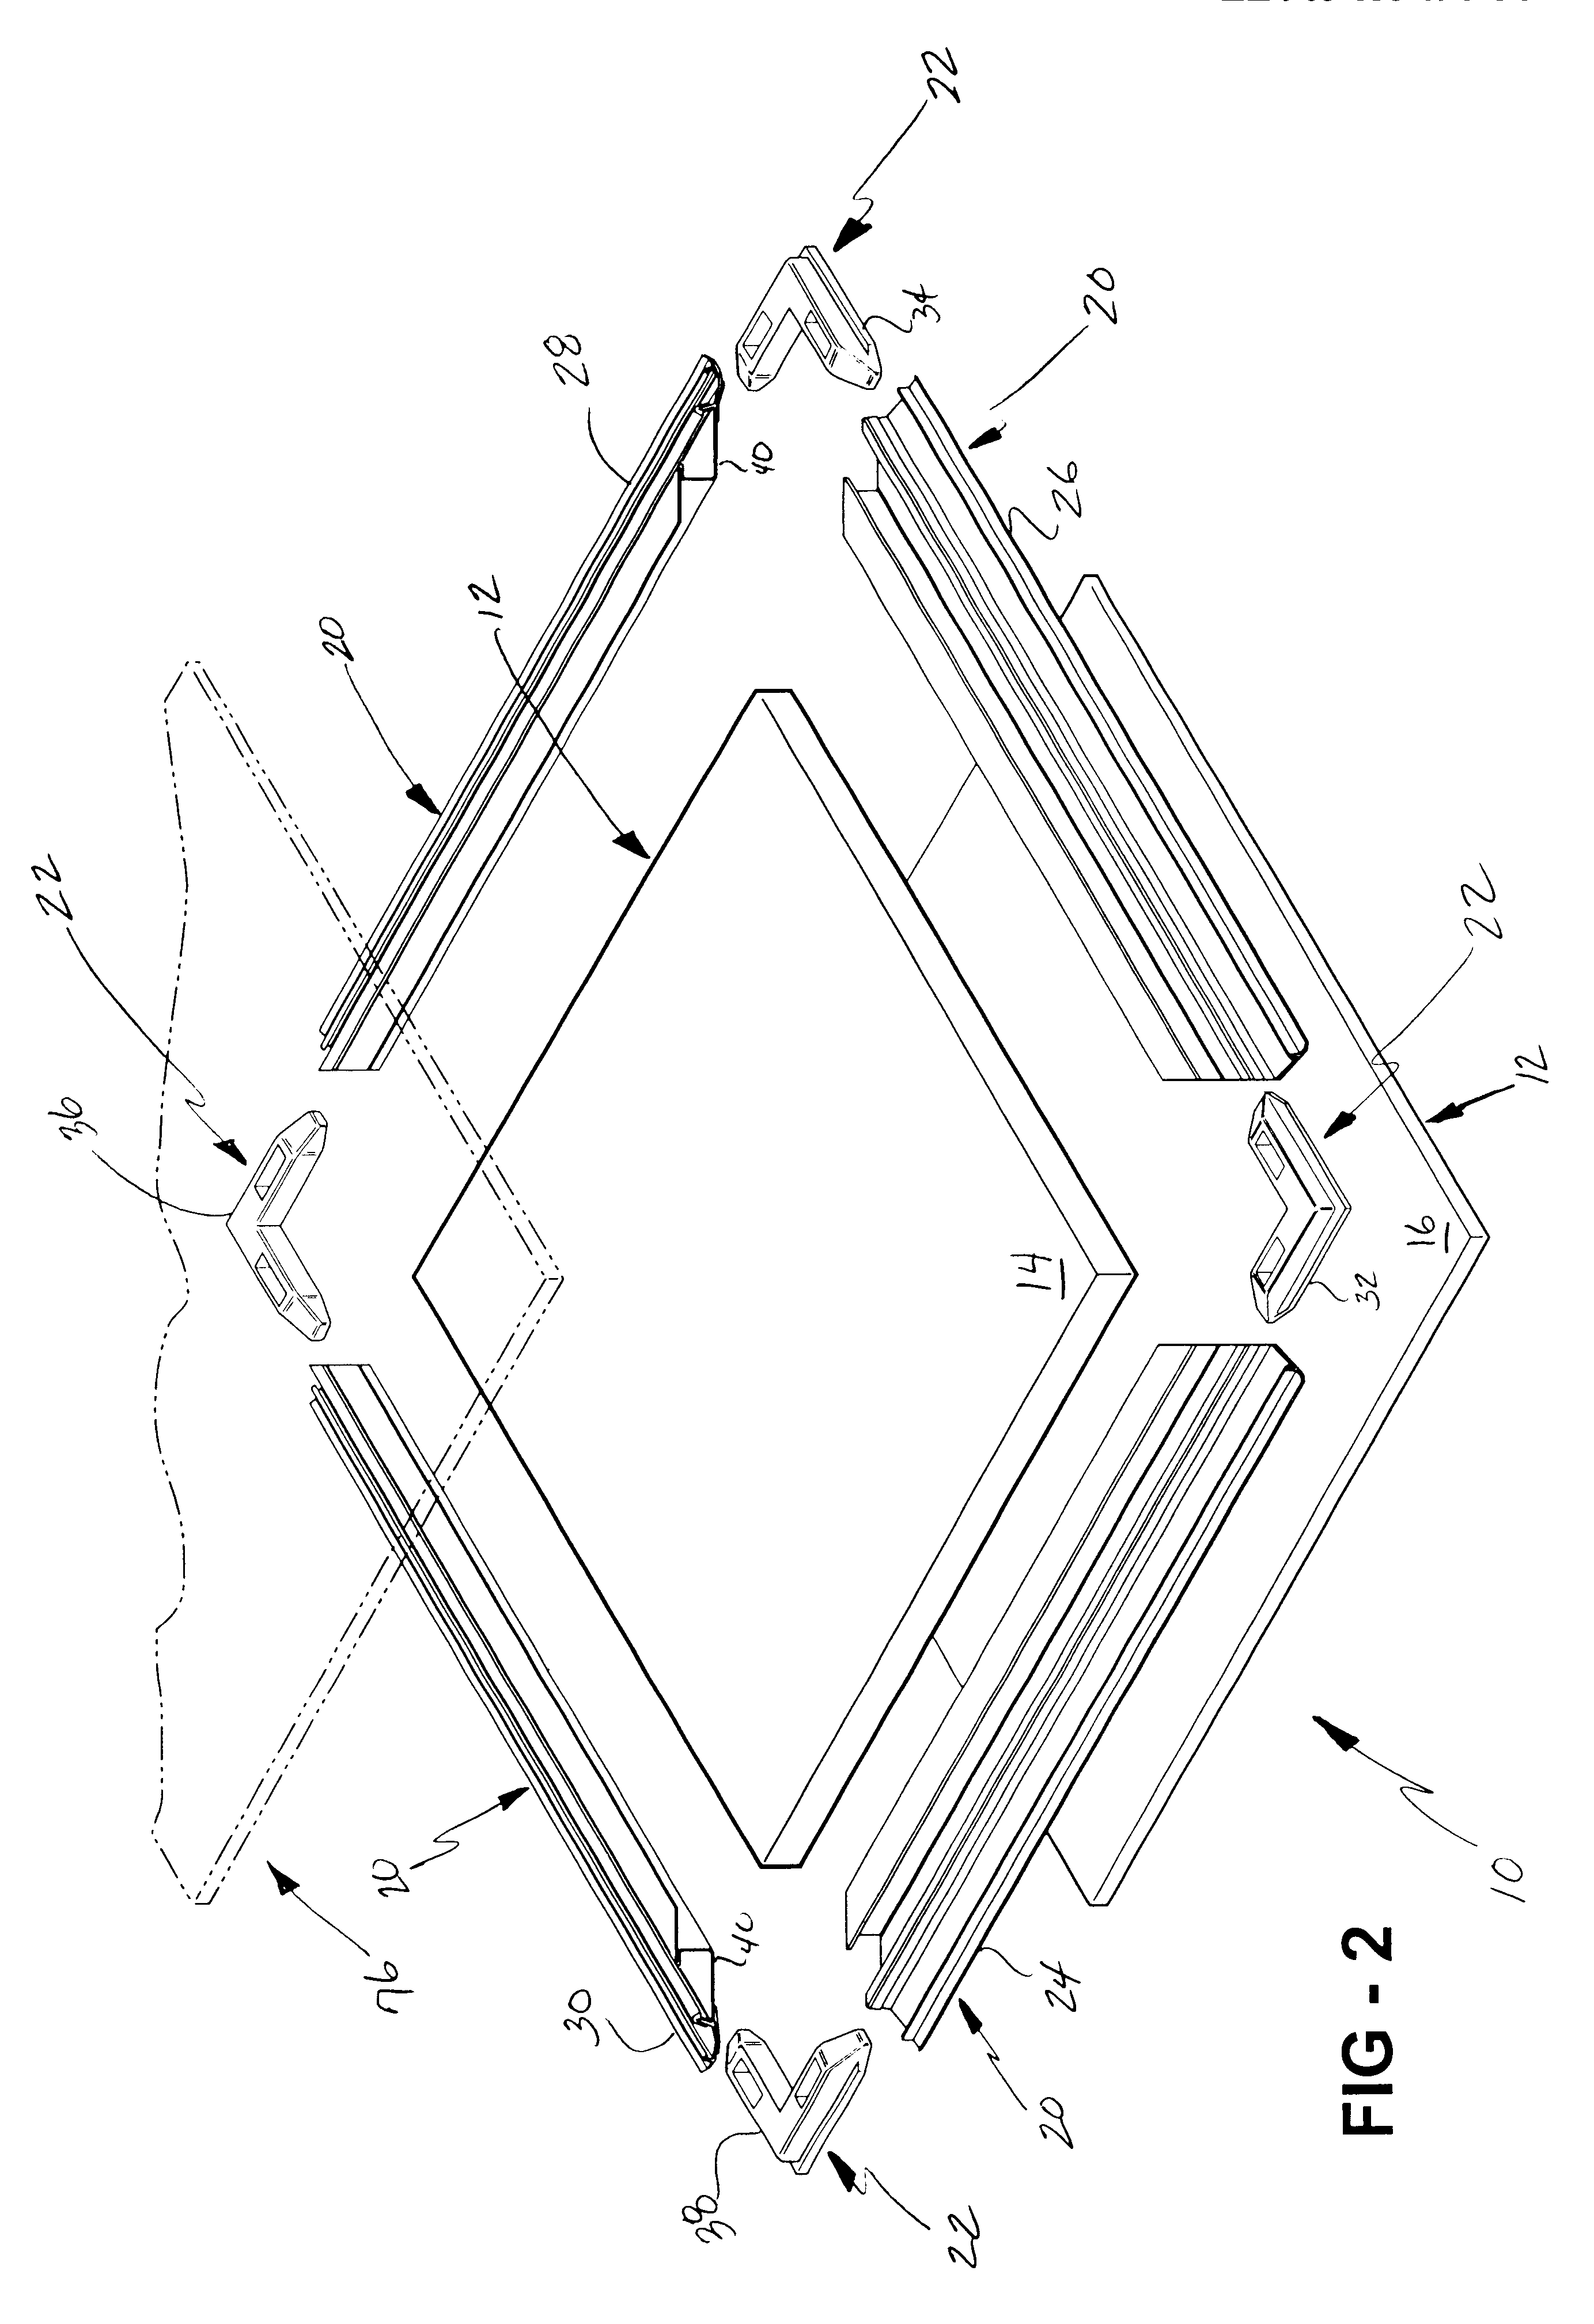 Method of assembling a frame assembly for a partition system